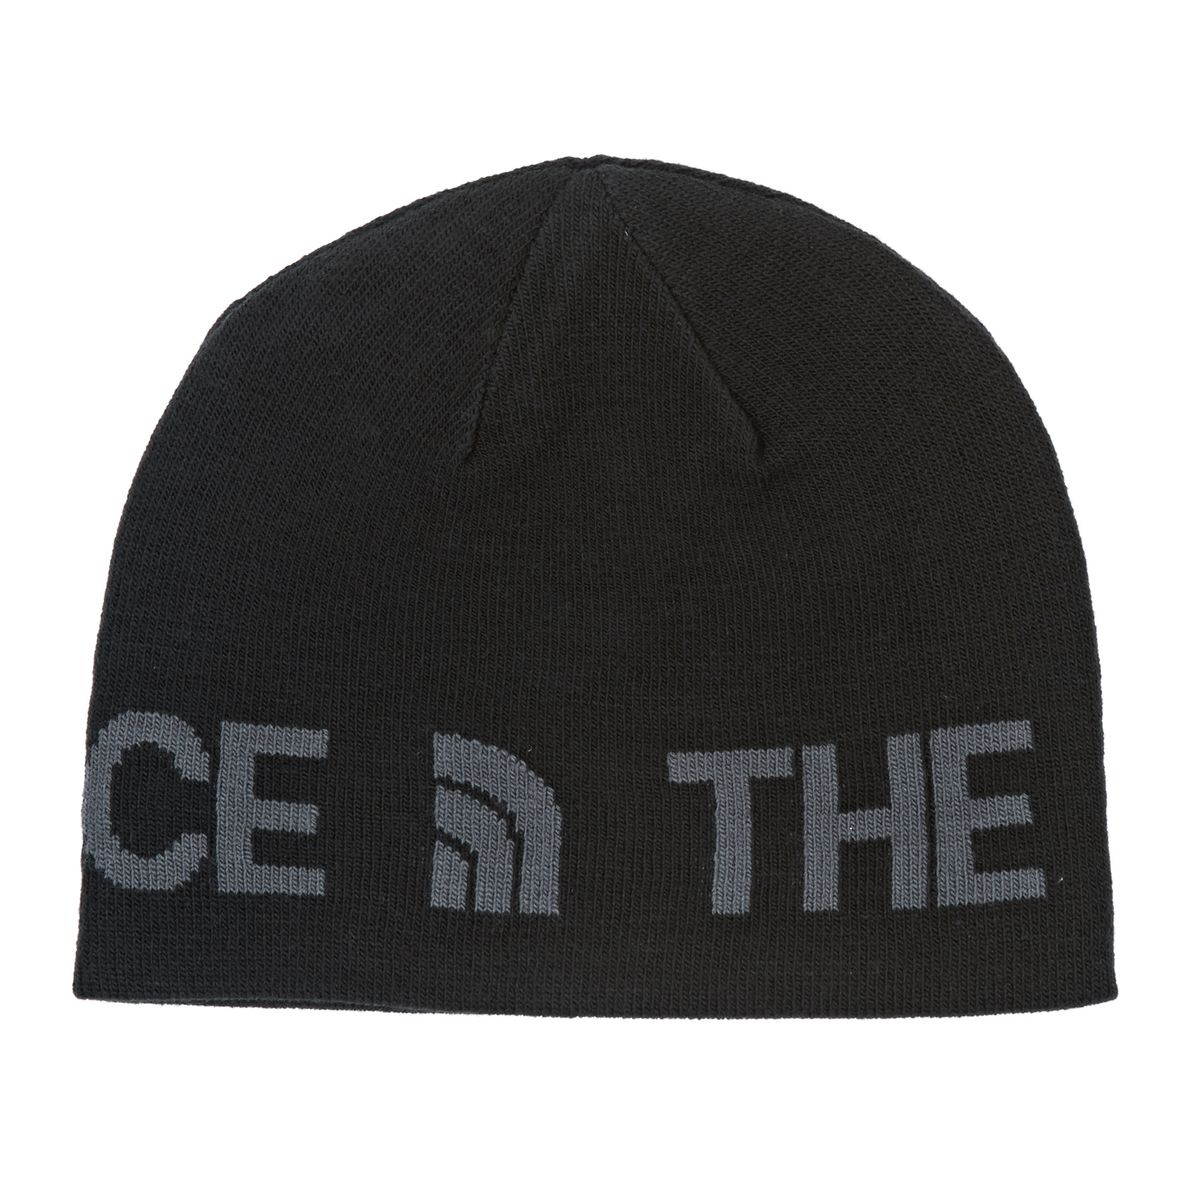 THE NORTH FACE REVERSIBLE BANNER BEANIE | Jolly Sport